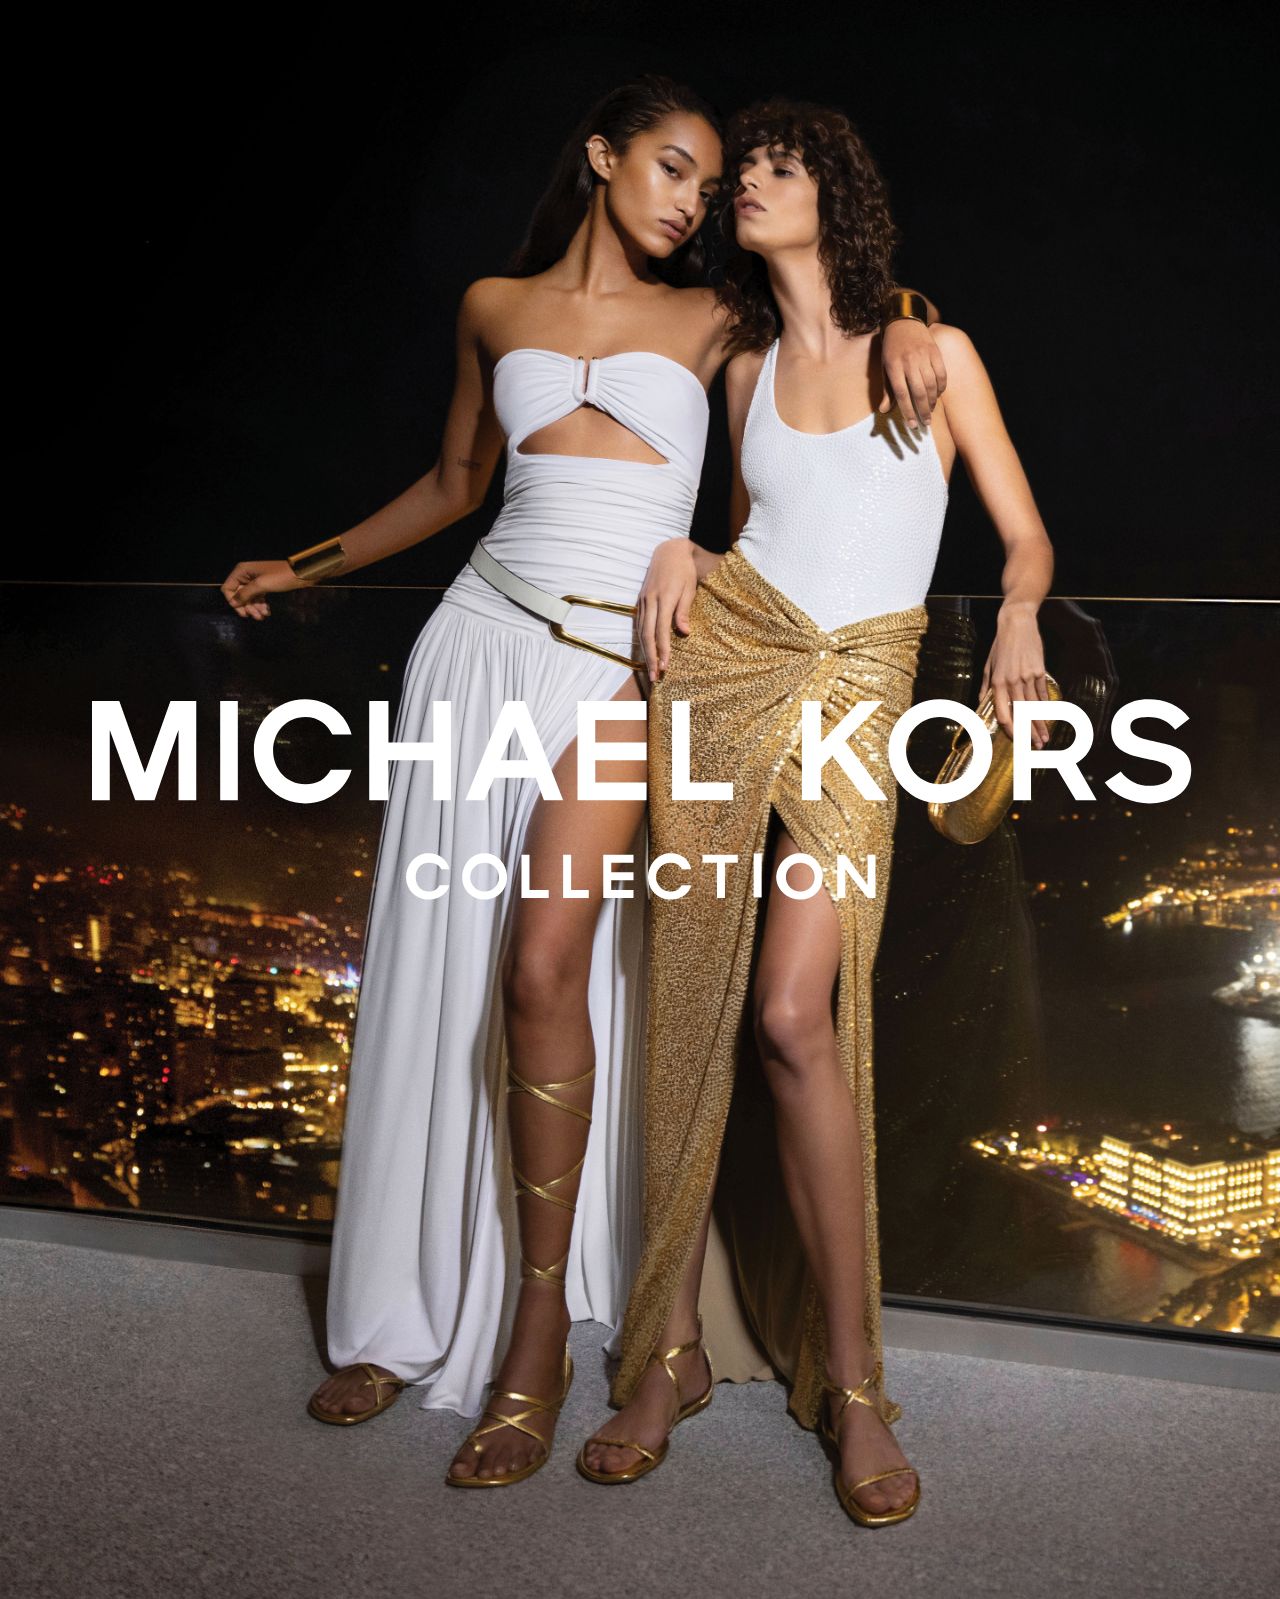 Michael Kors Kidswear debut Where to buy release date price and more  about the collection